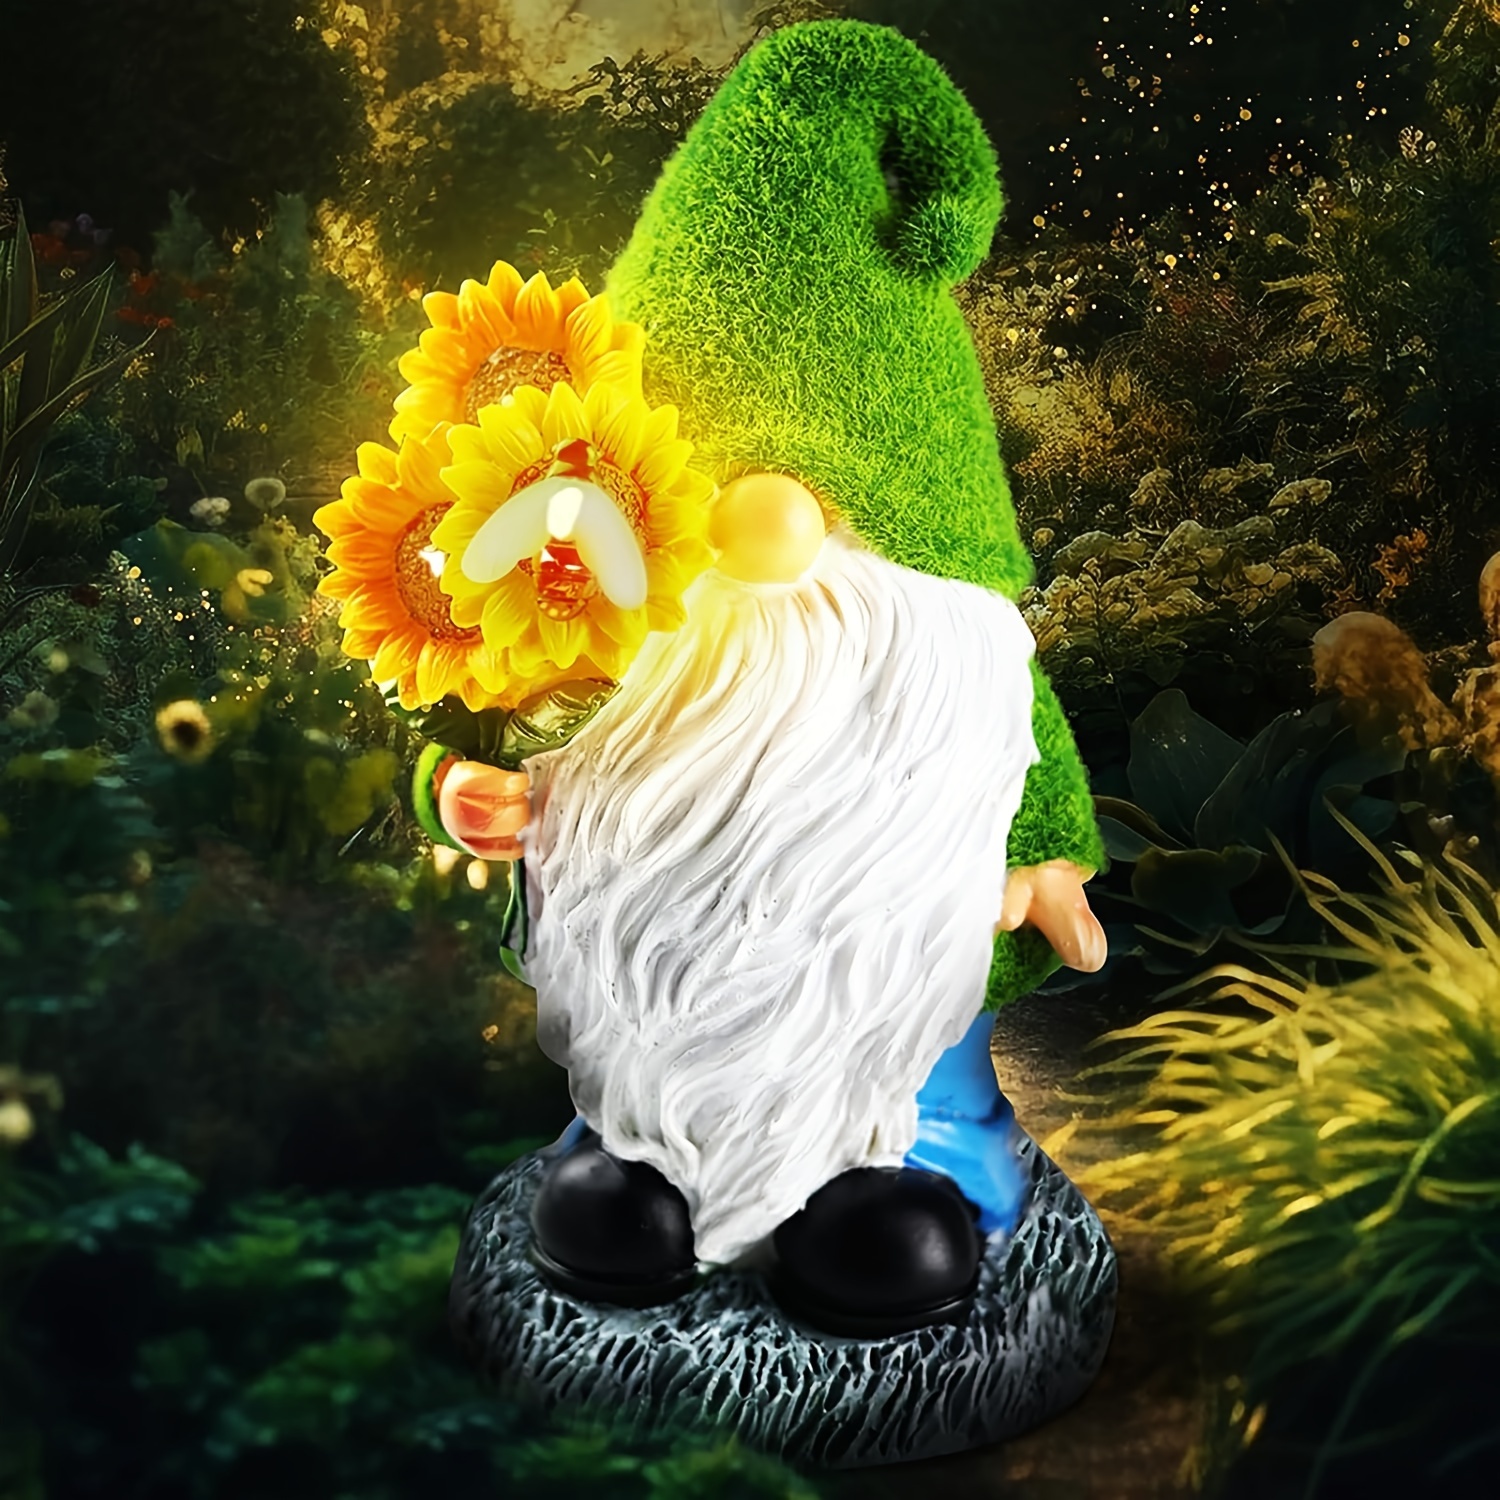 

Solar Garden Gnome Statue For Outdoor: 13.5'' Resin Garden Gnomes Figurine Holding Sunflowers With Solar Powered Lights - Yard Art Lawn Ornaments For Patio Lawn Porch Decor - Ideal Gifts For Women&men